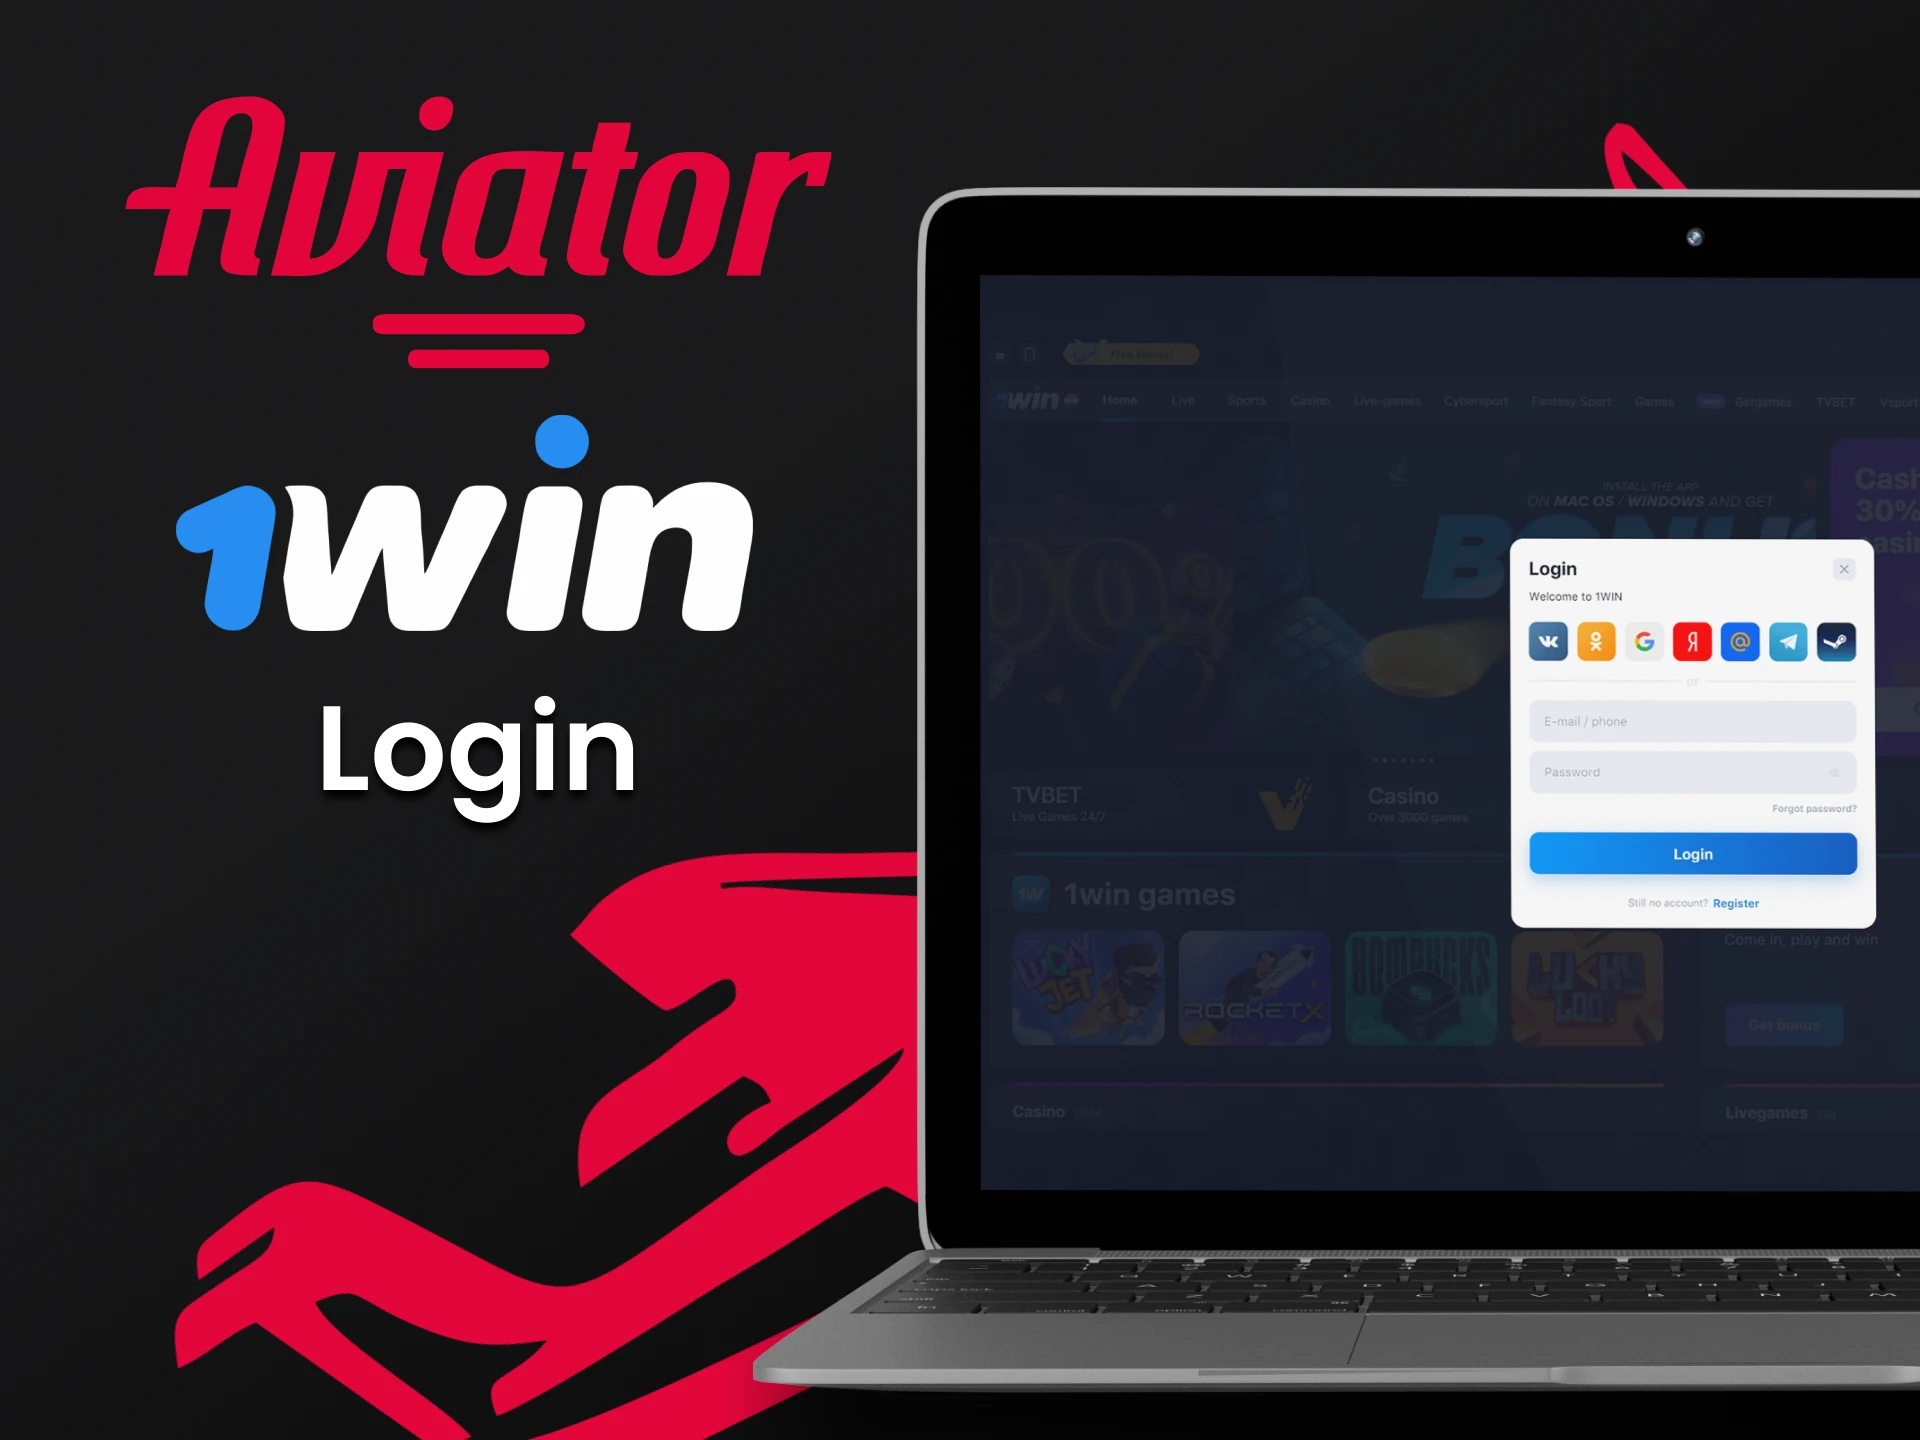 Login to your personal account to start playing Aviator on 1win.